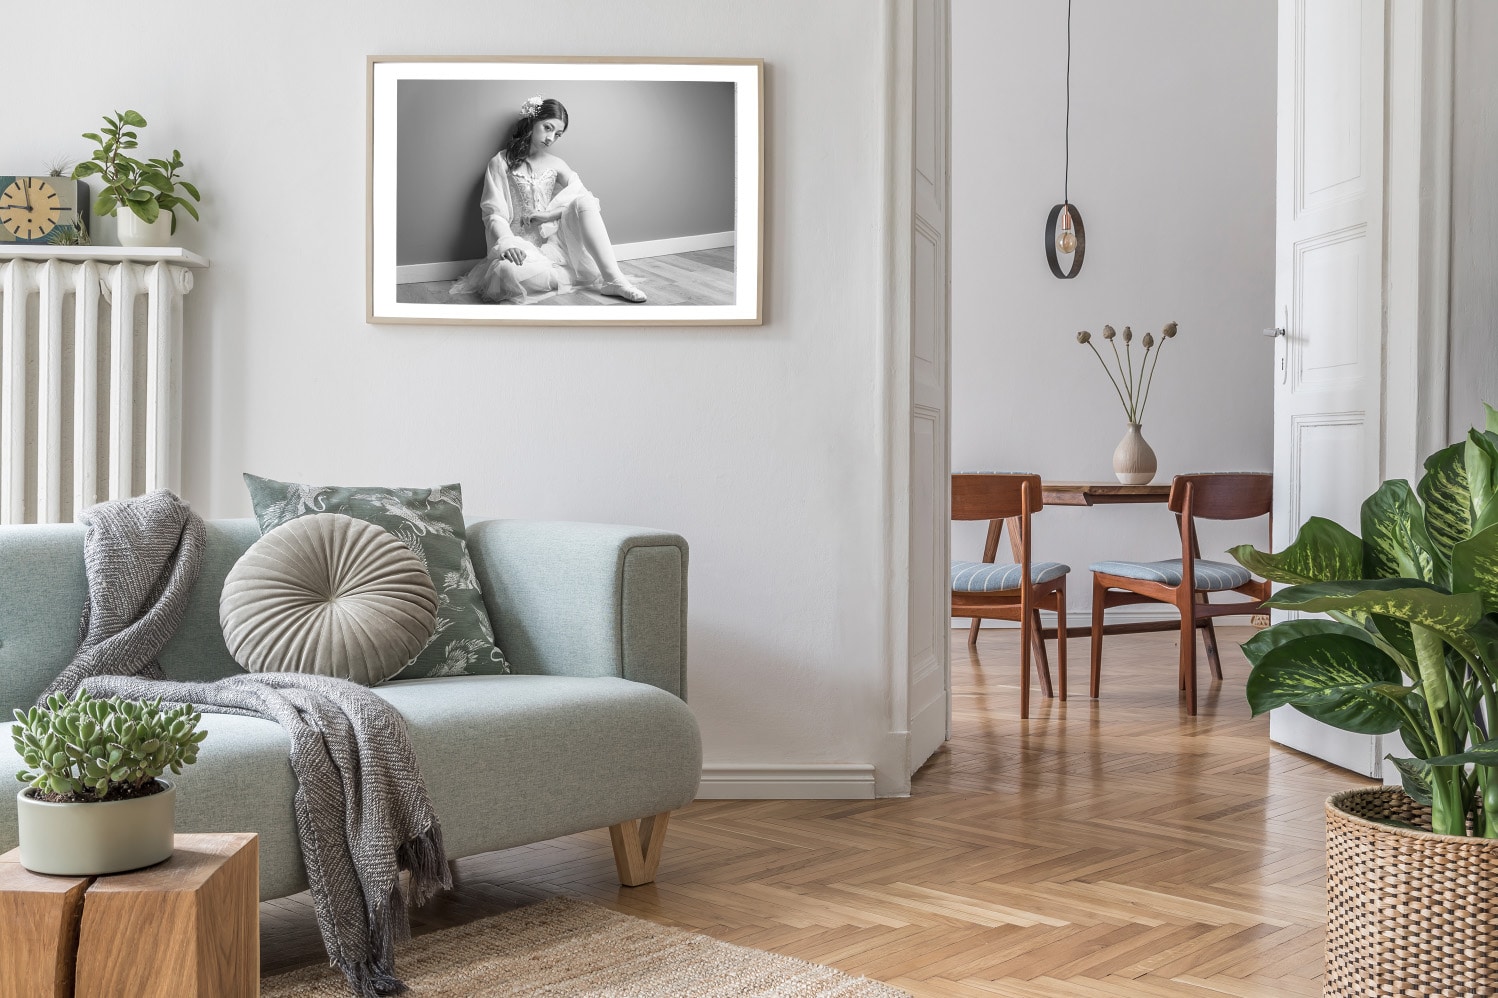 Portrait of a ballerina hanging on the wall in a white living room